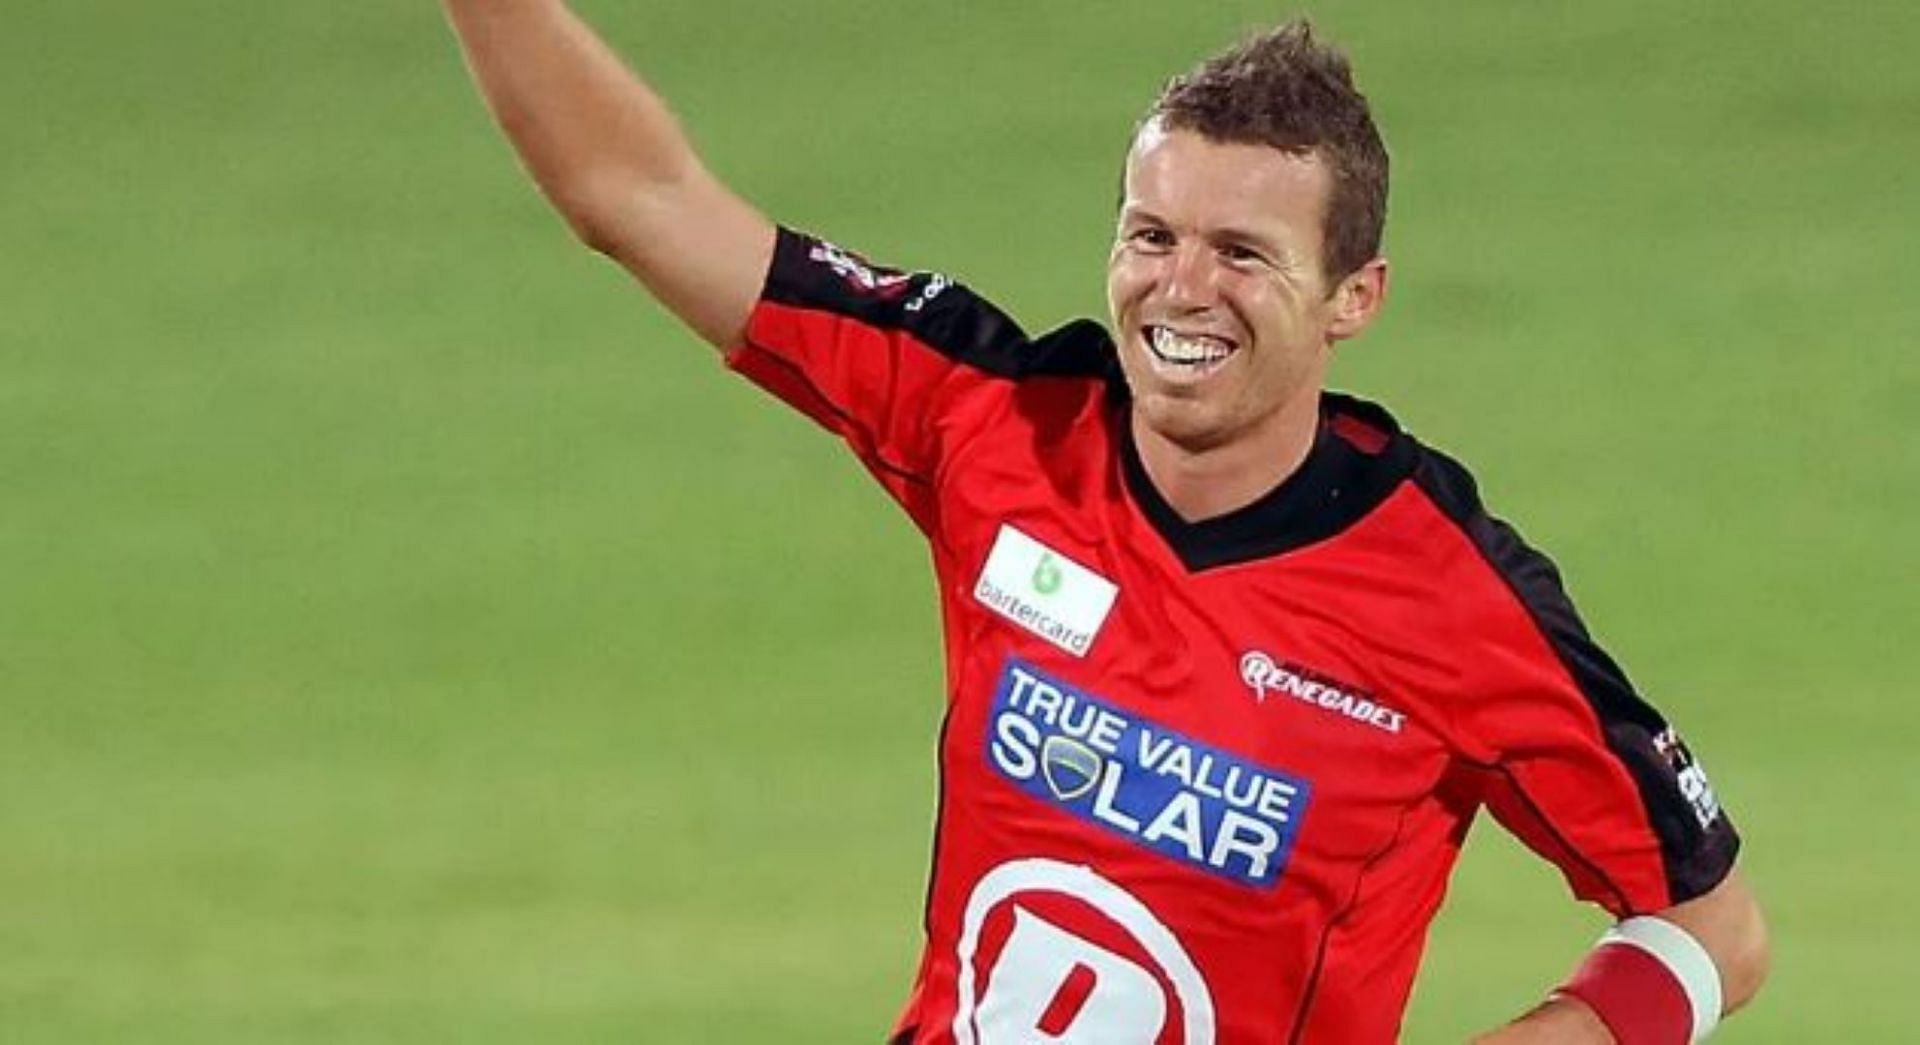 Siddle will return to the Renegades setup after six seasons.